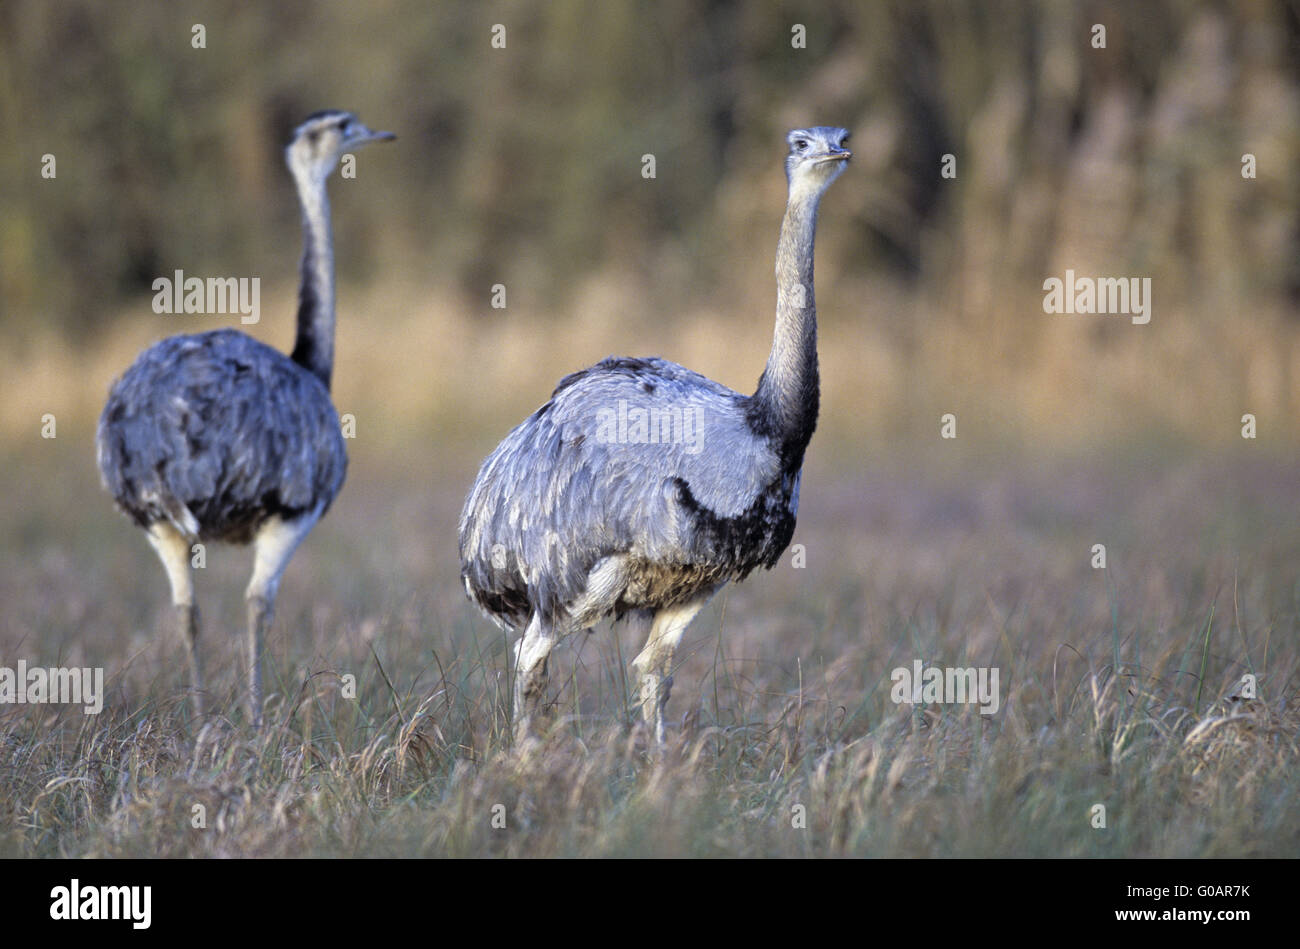 Greater Rhea looking towards to the photographer Stock Photo